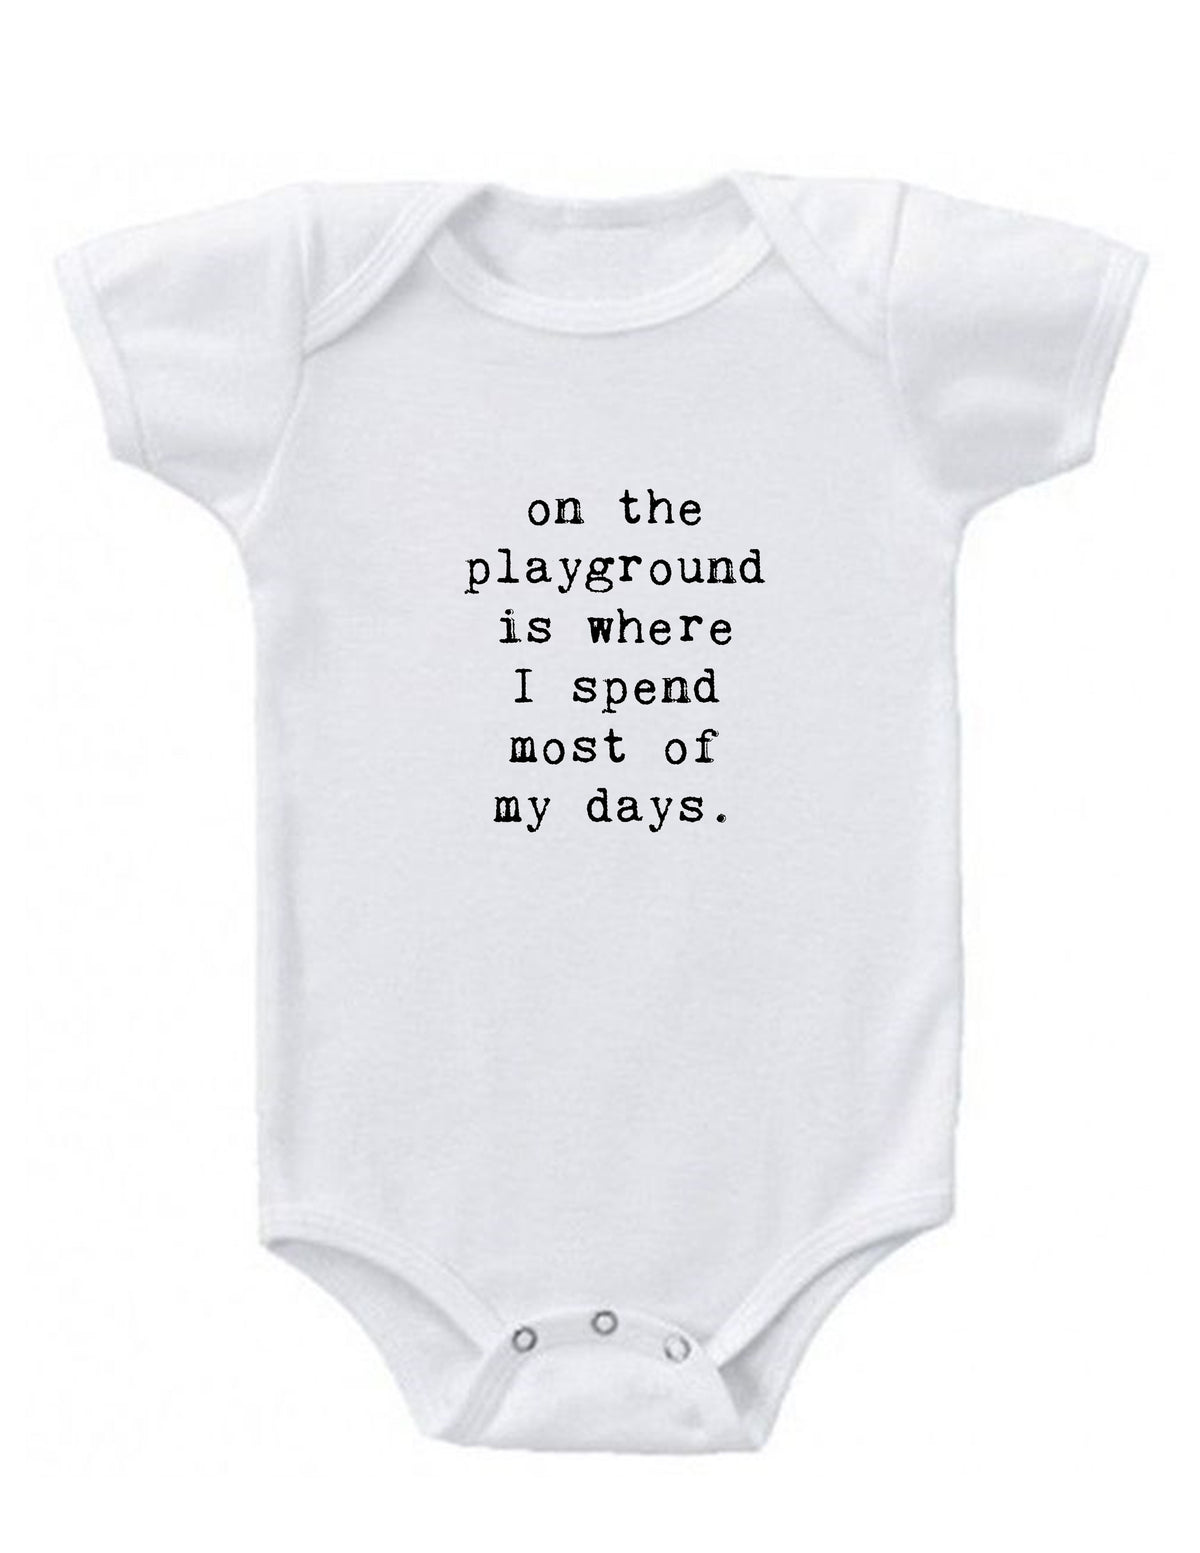 The Playground is Where I Spend Most of My Days Baby Onesie